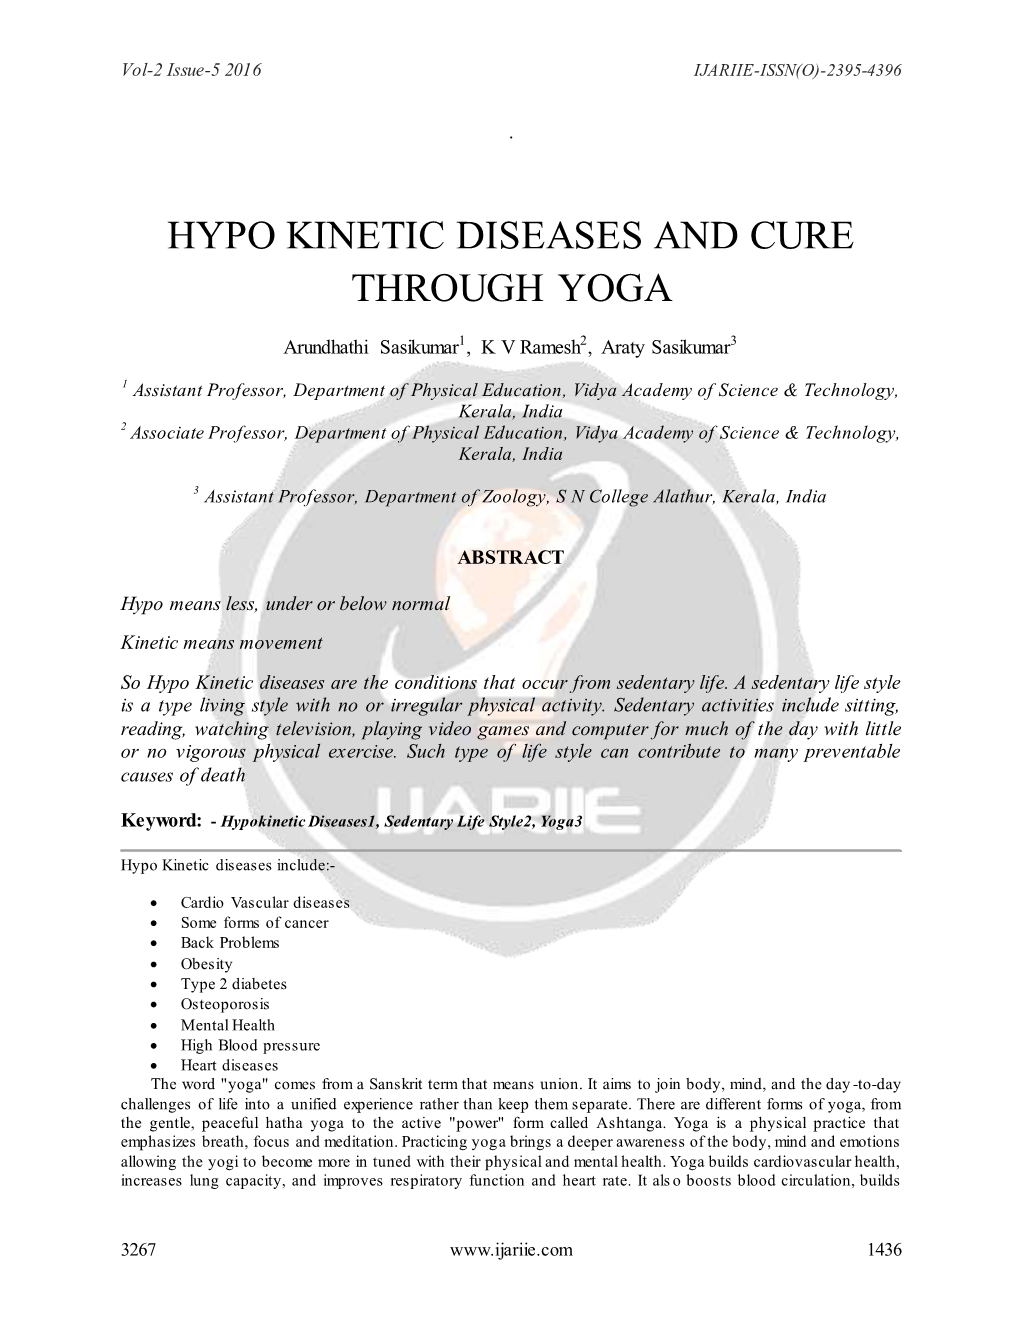 Hypo Kinetic Diseases and Cure Through Yoga